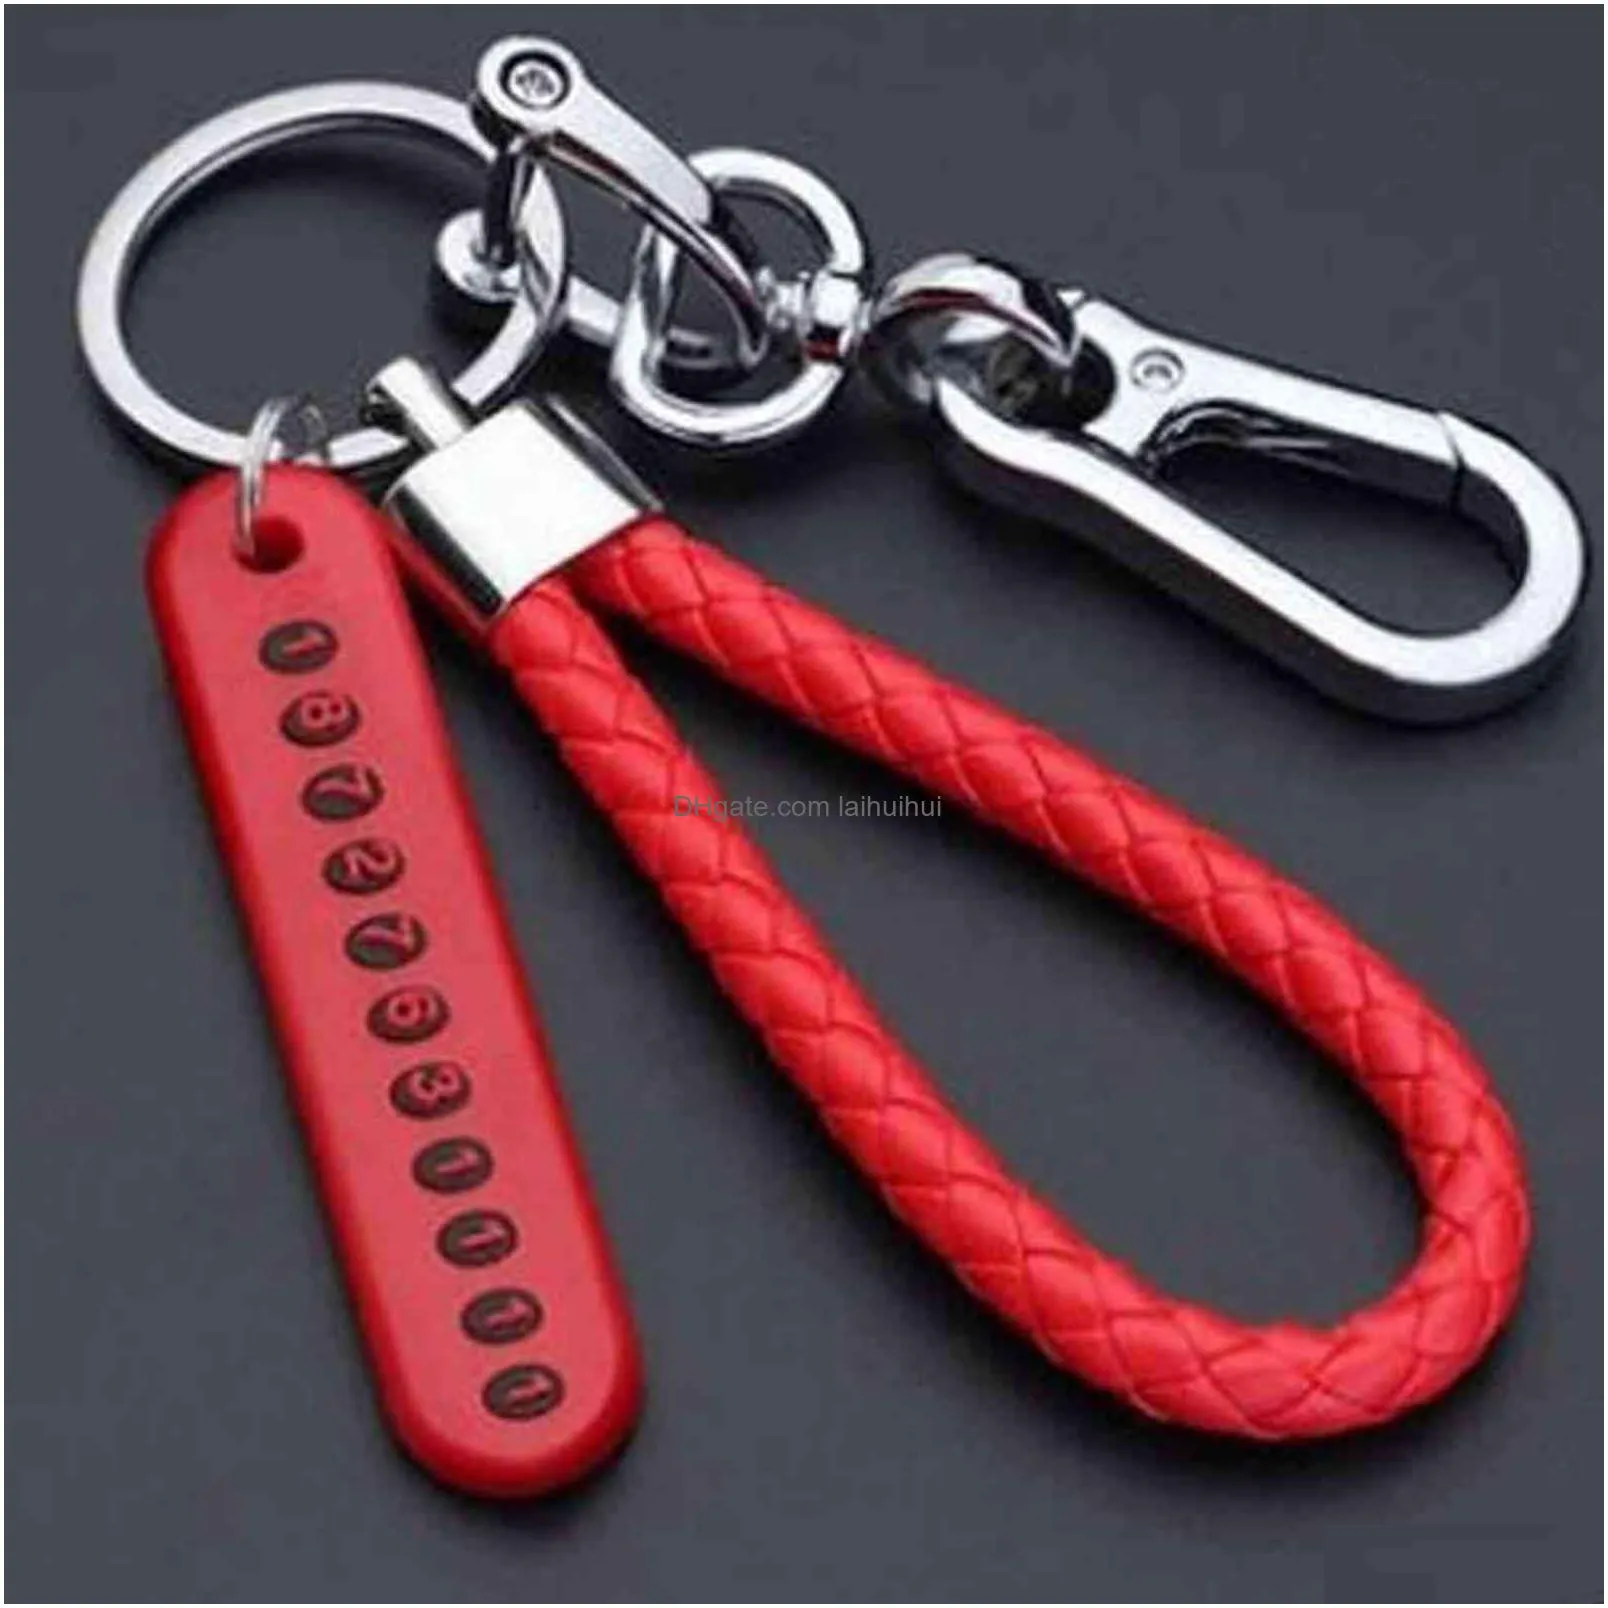 5 anti-lost car key pendant split rings keychain phone number card keyring auto vehicle key chain car accessories h1126